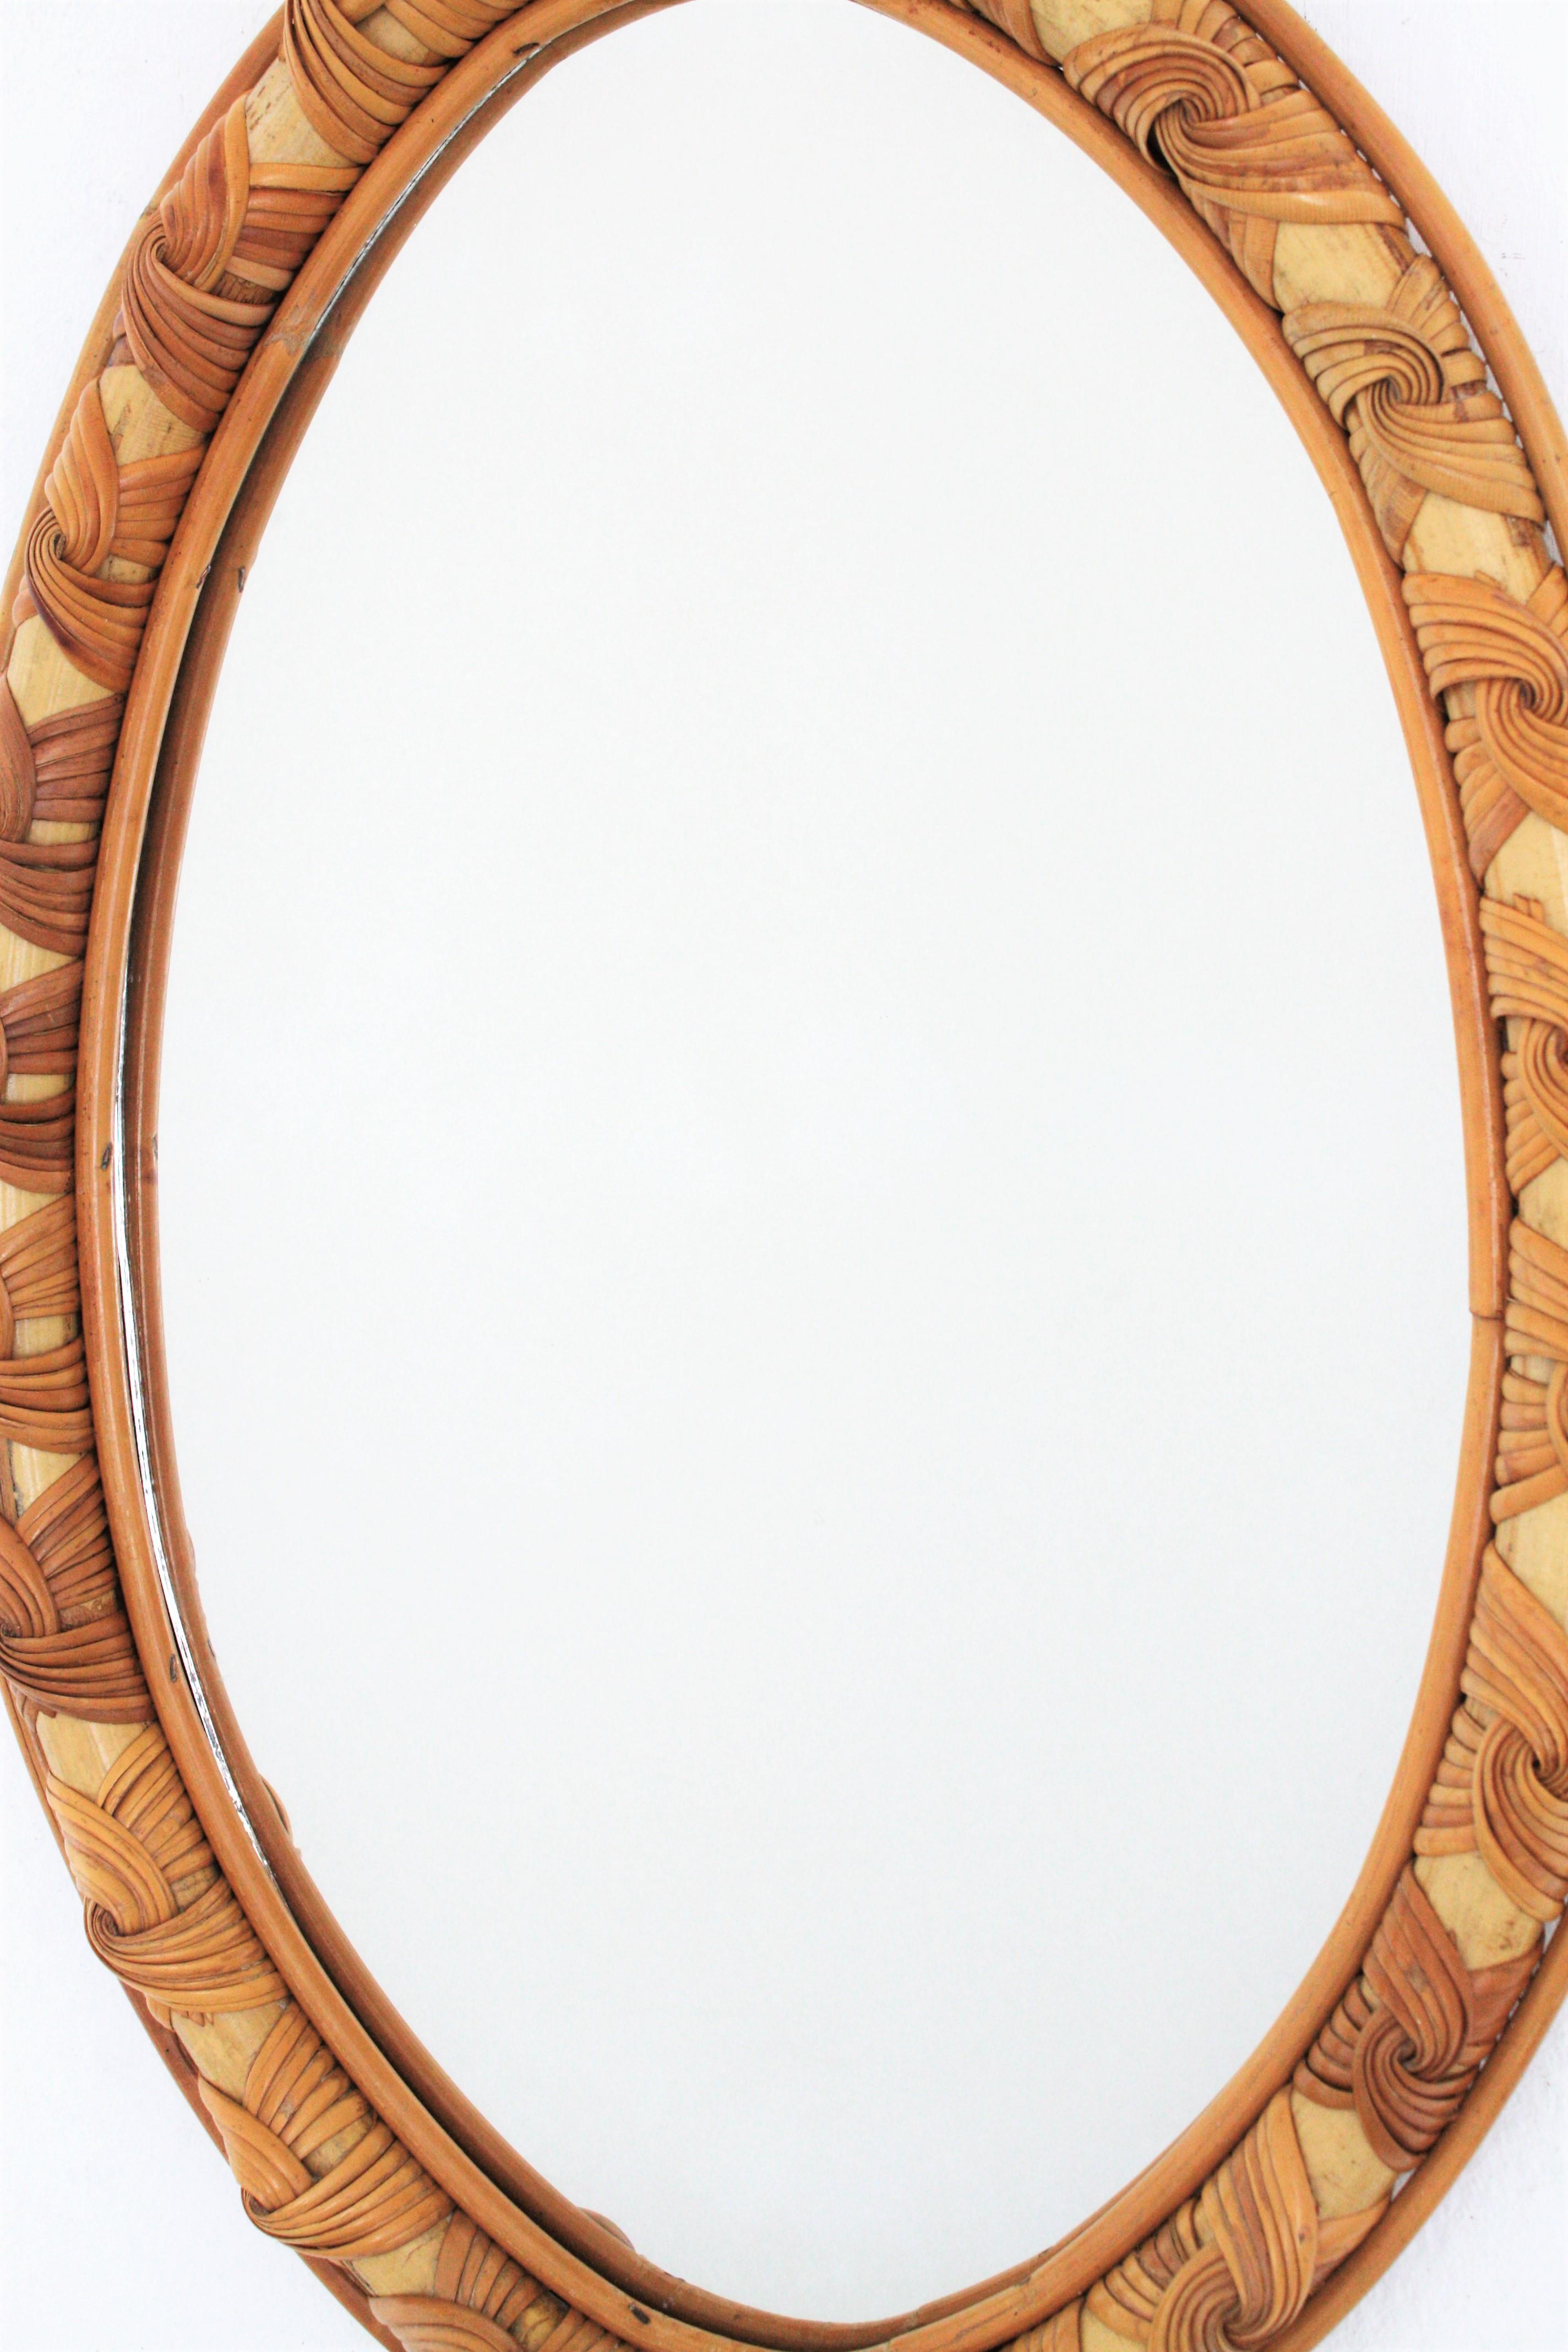 Hand-Crafted French Riviera Rattan Oval Mirror, Frame with Knot Details For Sale